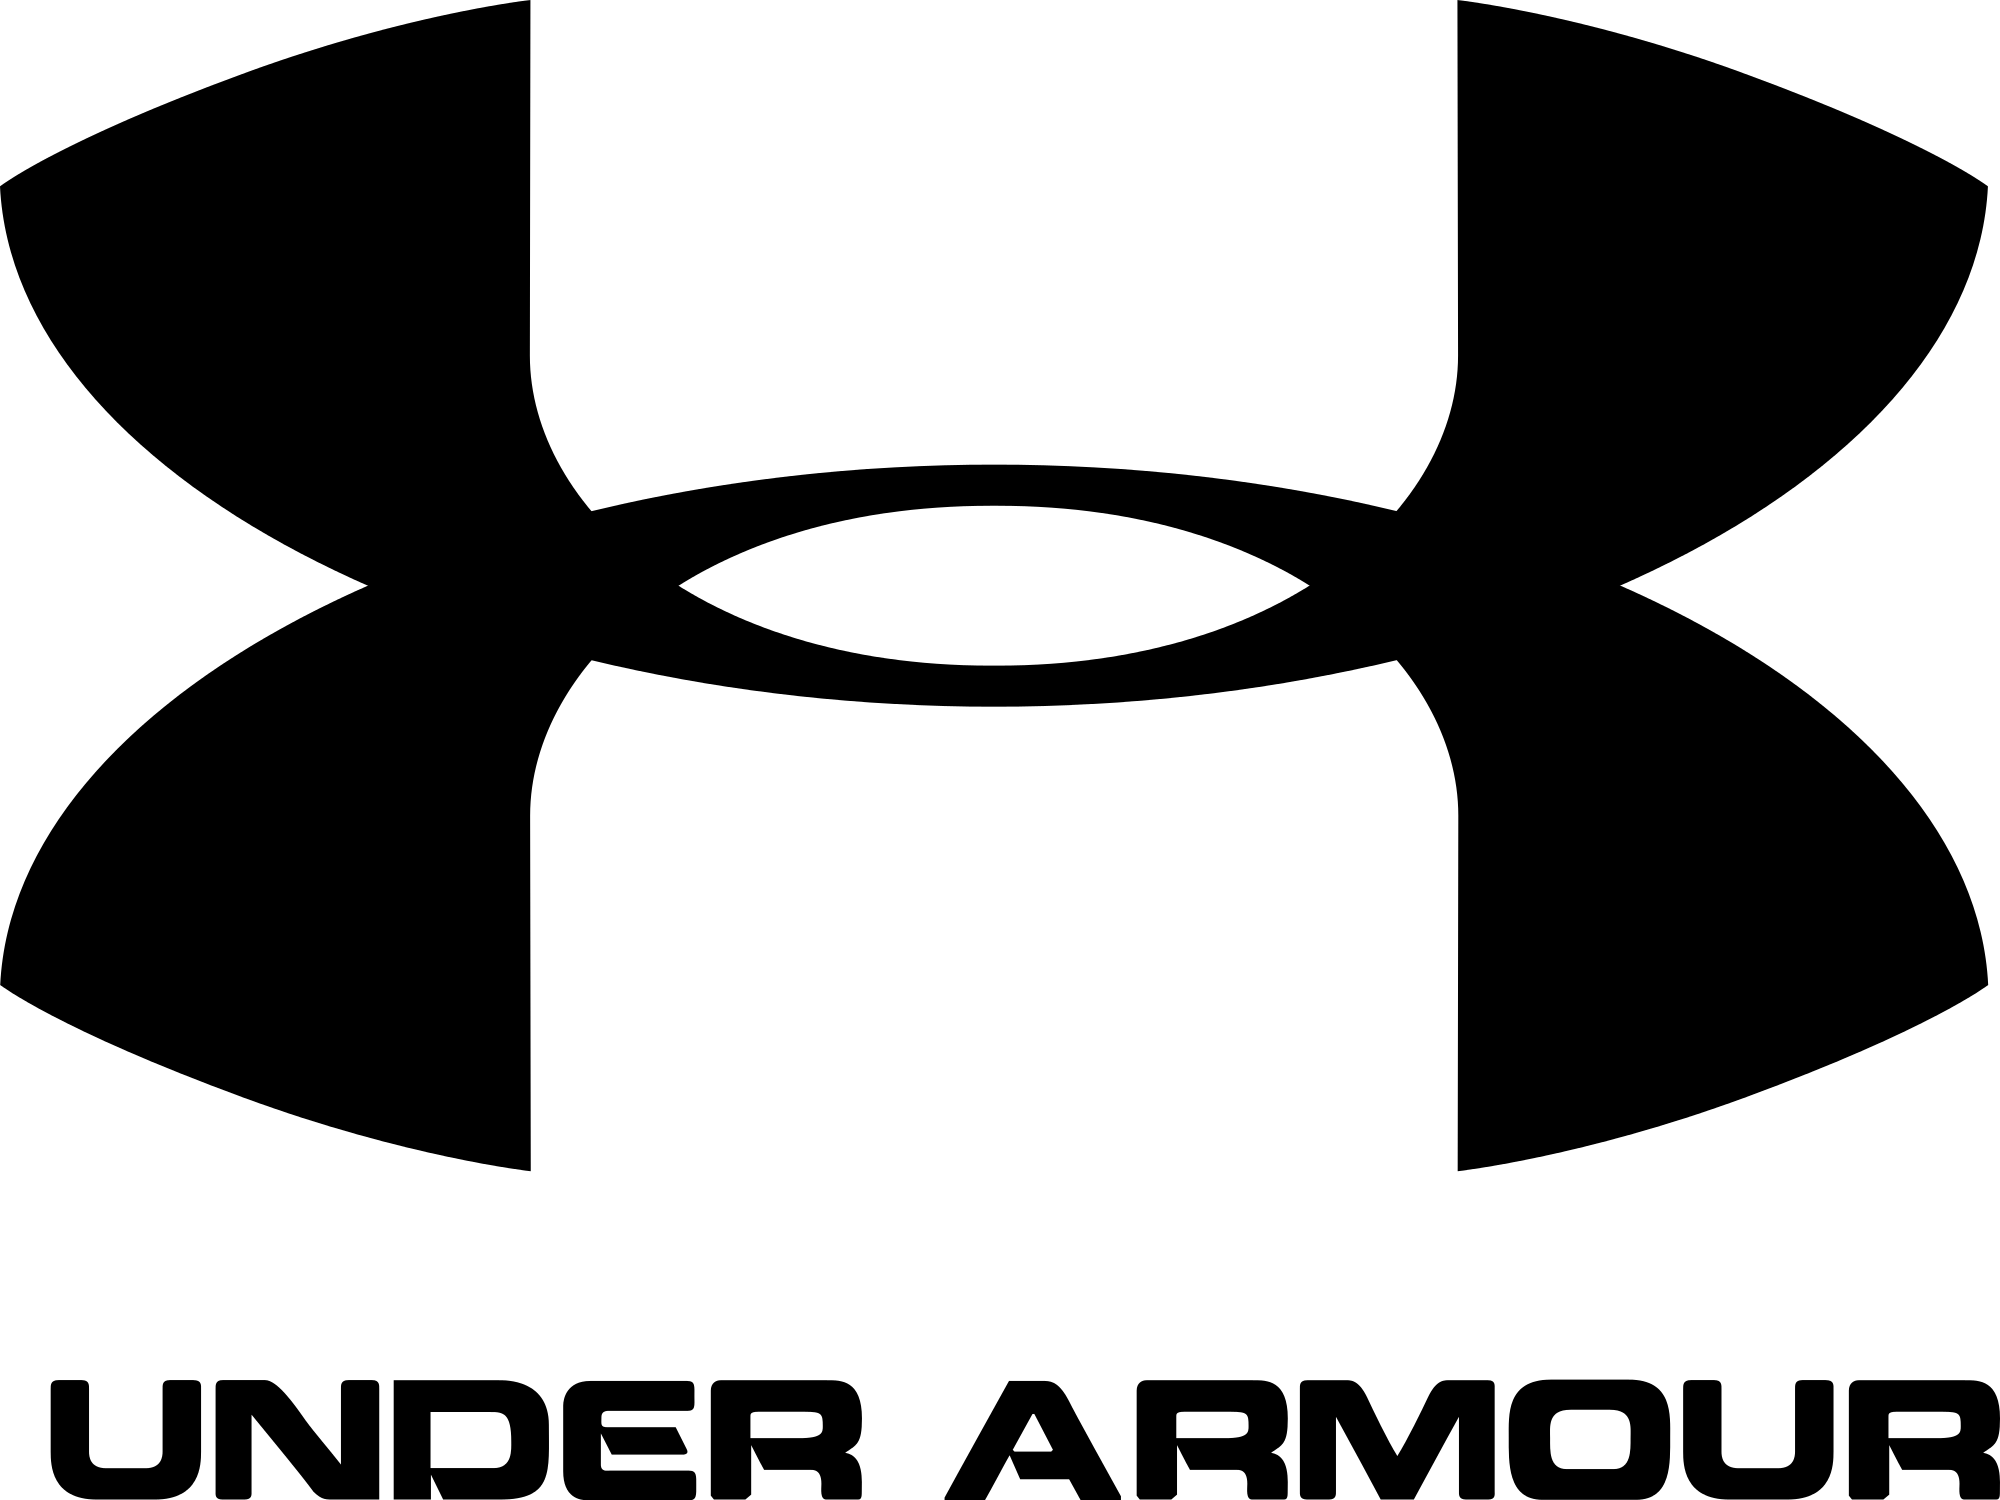 Cool Under Armour Basketball Logo - Free Under Armour Cliparts, Download Free Clip Art, Free Clip Art on ...